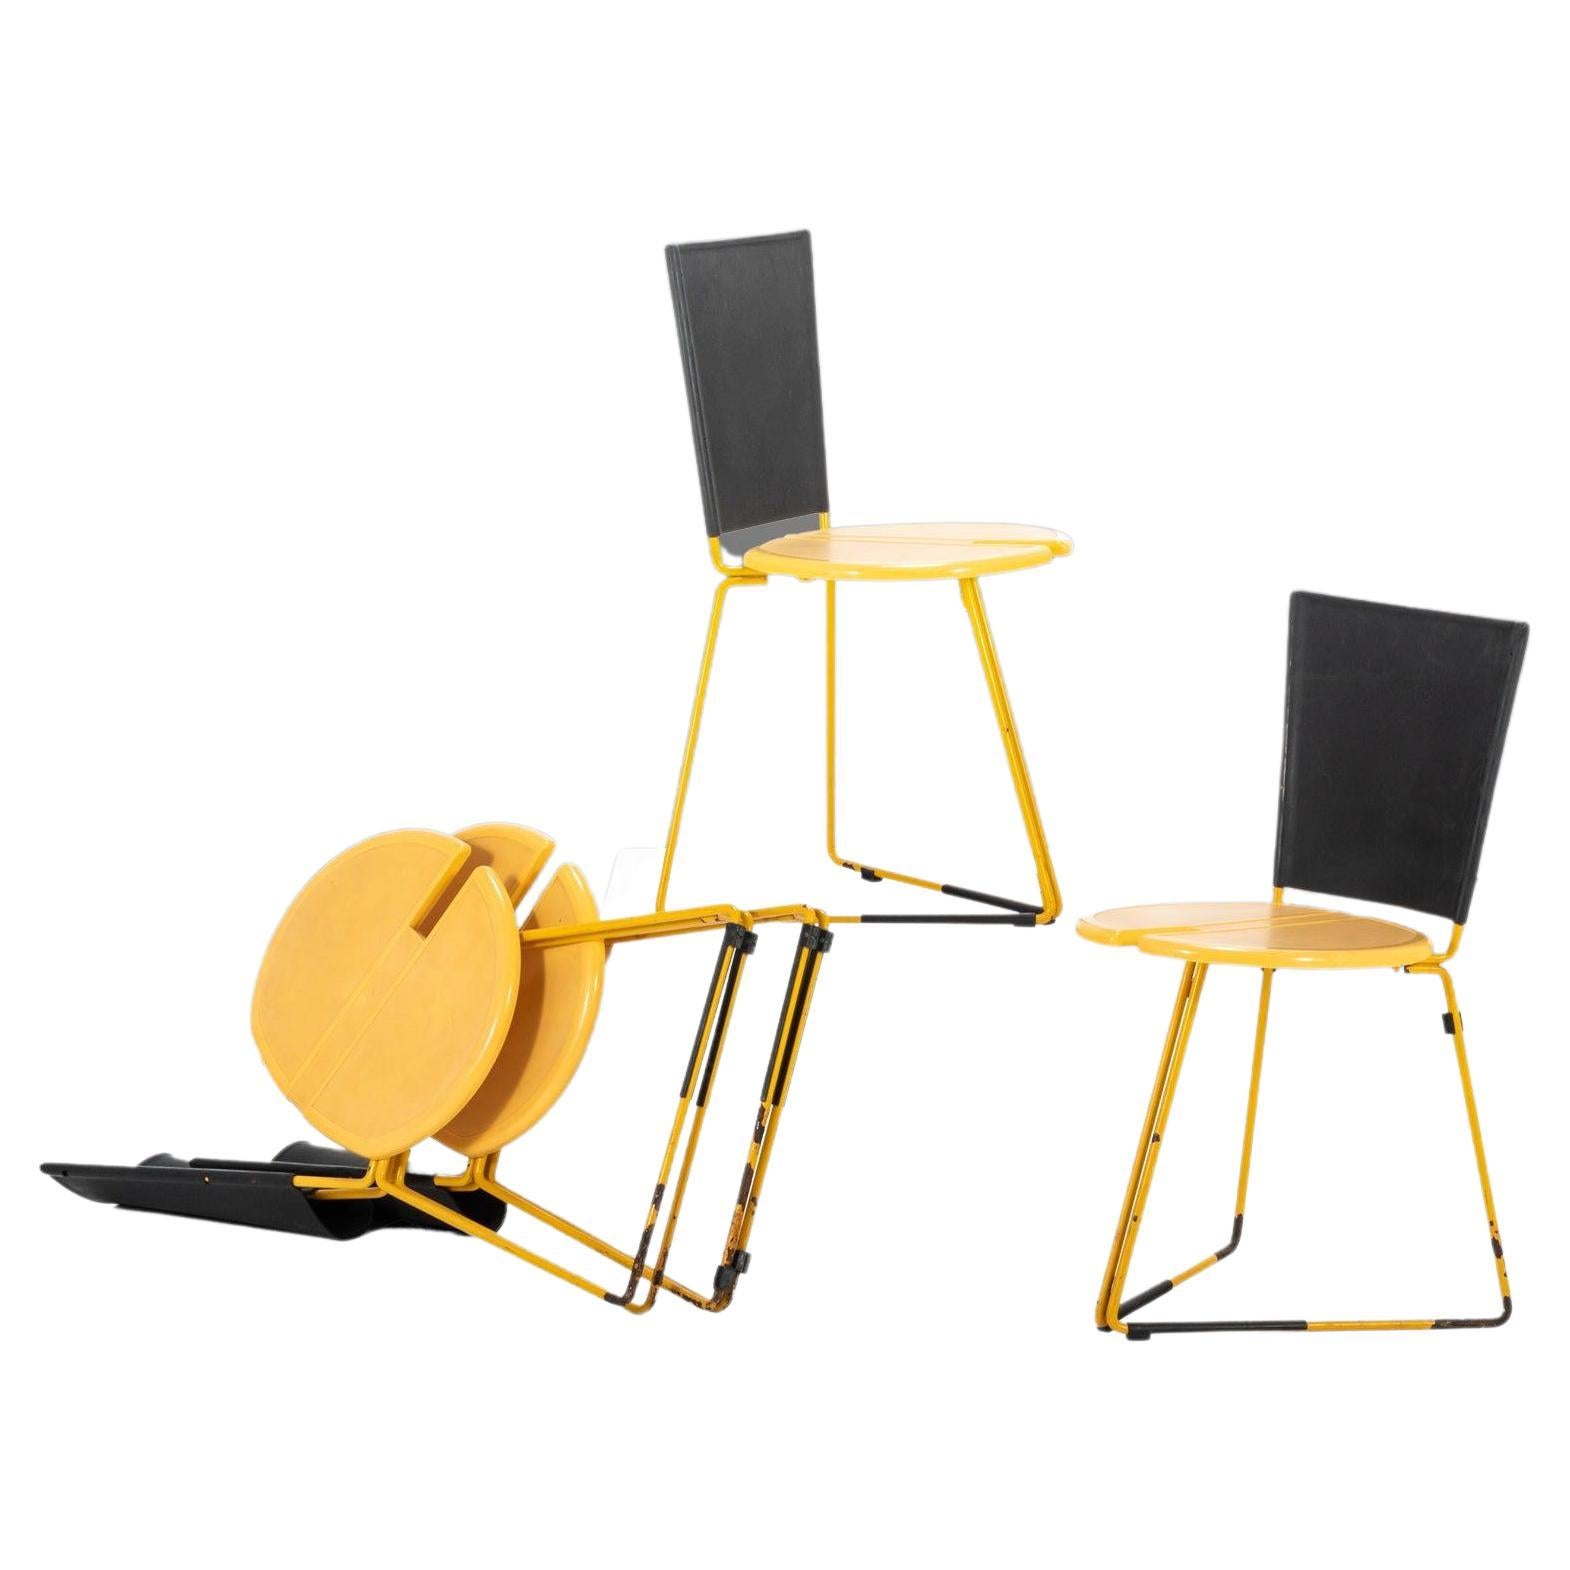 This playfully designed set of chairs is as stylish as they are versatile. Foldable, stackable and lightweight these chairs can be taken practically anywhere and stored with ease when not in use. The canary yellow and black or 'bumble bee' scheme is